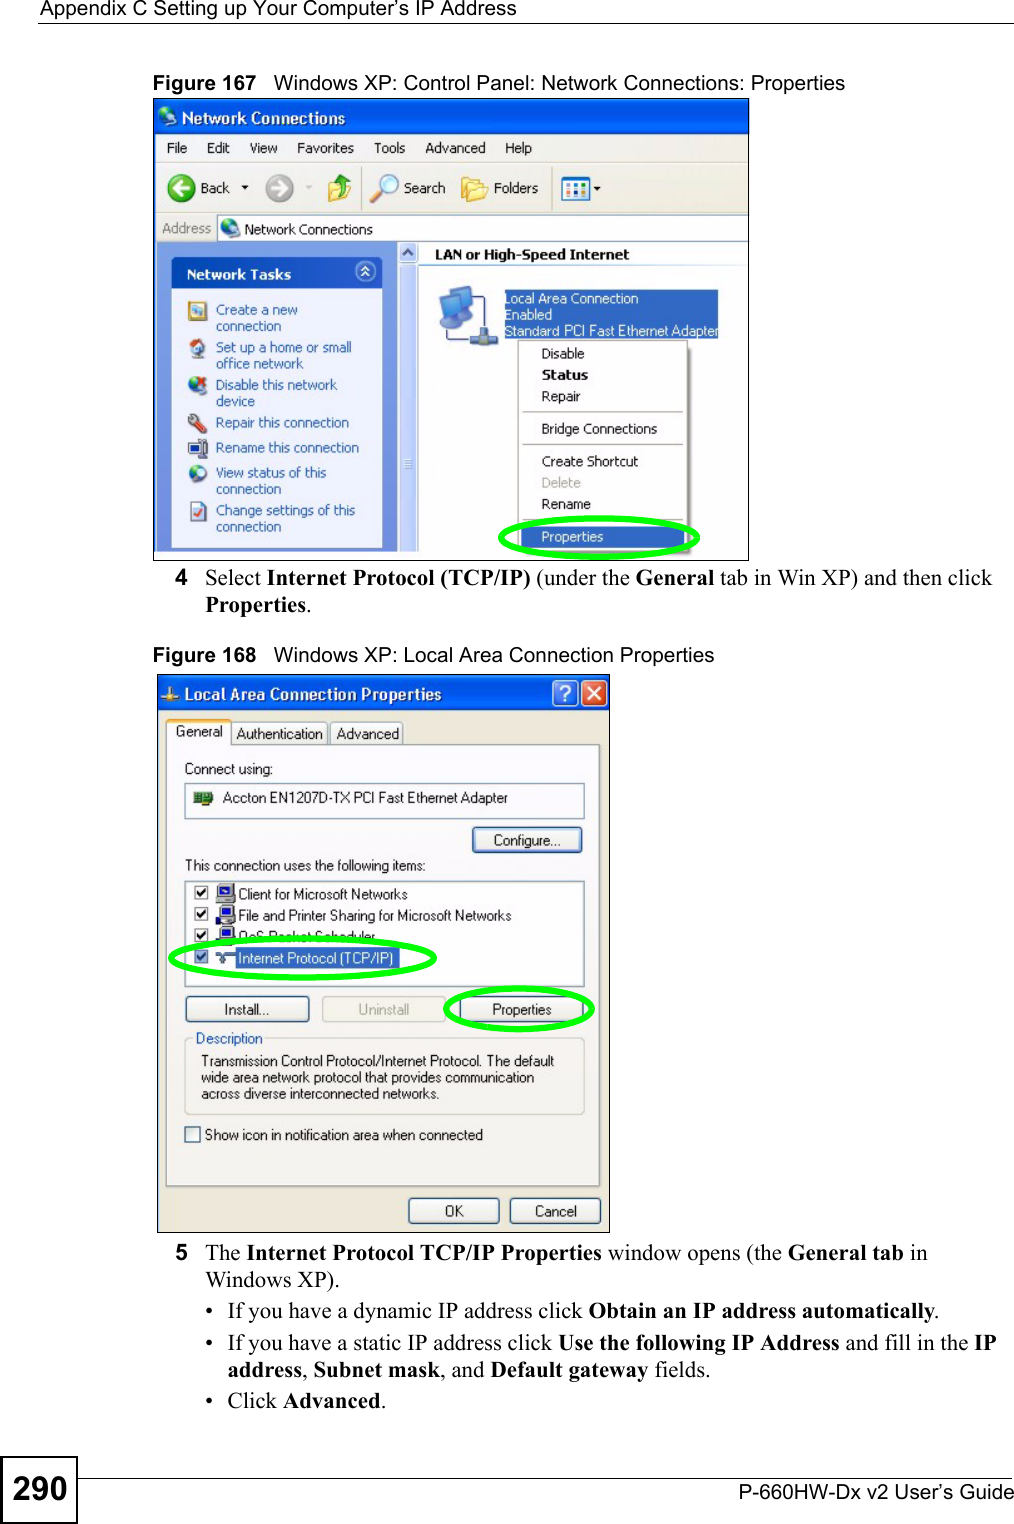 Appendix C Setting up Your Computer’s IP AddressP-660HW-Dx v2 User’s Guide290Figure 167   Windows XP: Control Panel: Network Connections: Properties4Select Internet Protocol (TCP/IP) (under the General tab in Win XP) and then click Properties.Figure 168   Windows XP: Local Area Connection Properties5The Internet Protocol TCP/IP Properties window opens (the General tab in Windows XP).• If you have a dynamic IP address click Obtain an IP address automatically.• If you have a static IP address click Use the following IP Address and fill in the IP address, Subnet mask, and Default gateway fields. • Click Advanced.